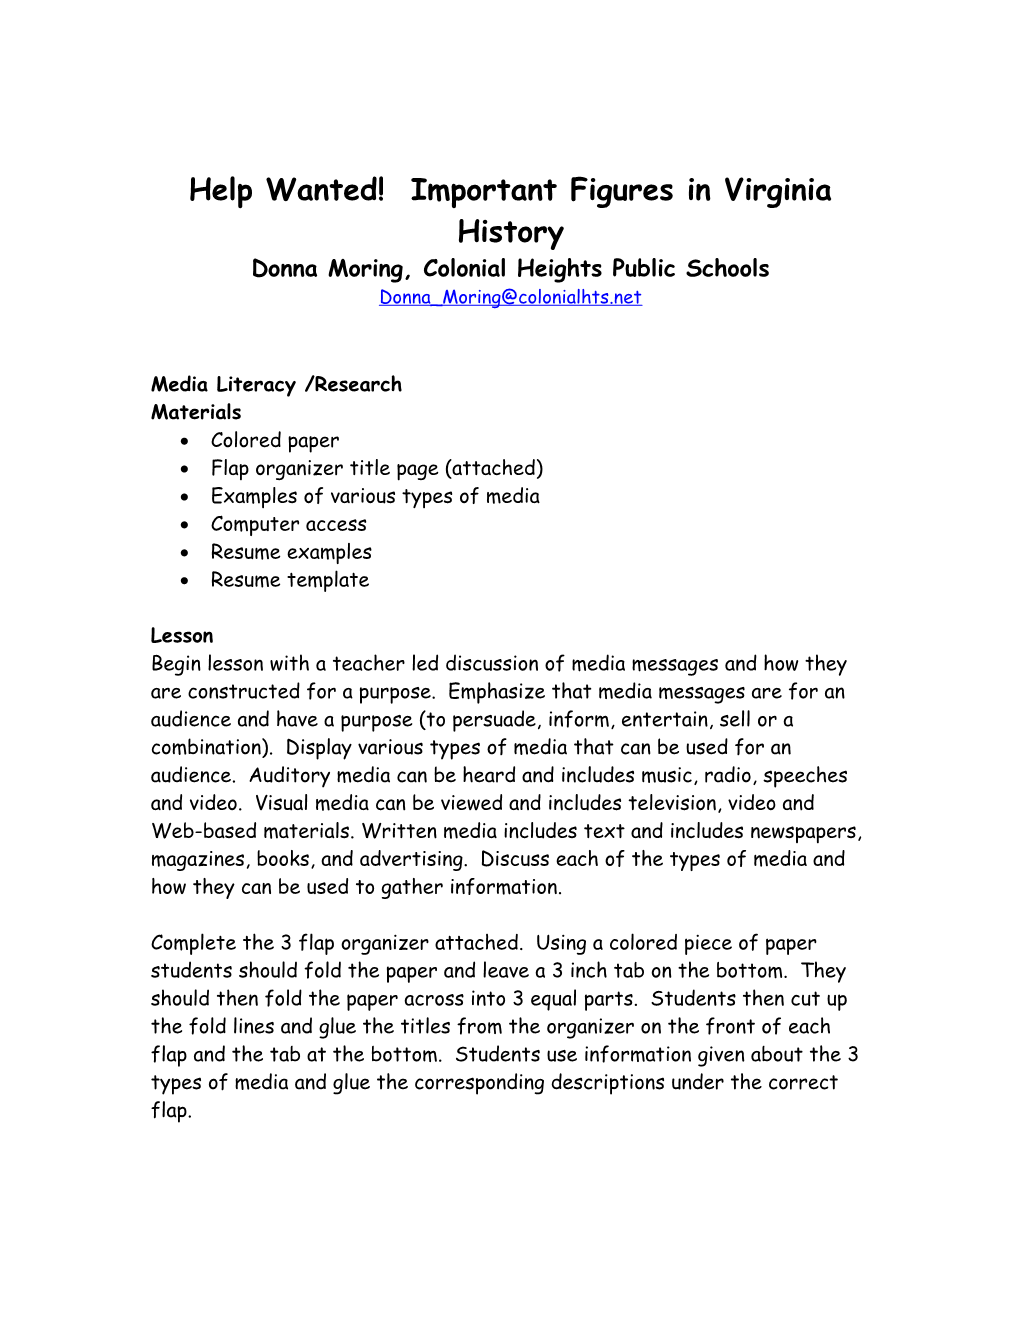 Help Wanted! Important Figures in Virginia History